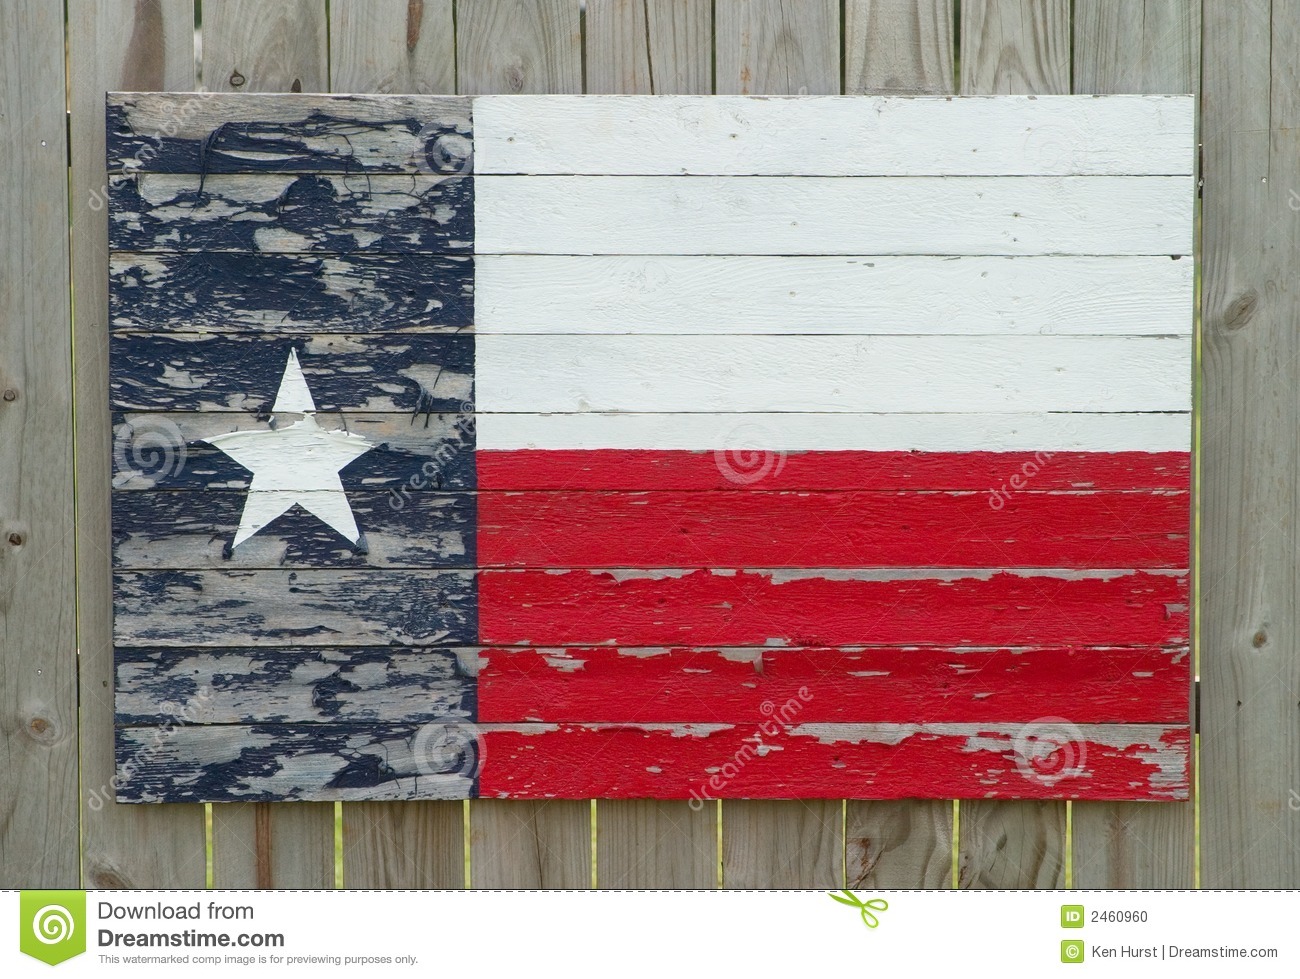 Old Rustic Texas Flag Painted Onto Wood Slats On A Wood Fence 